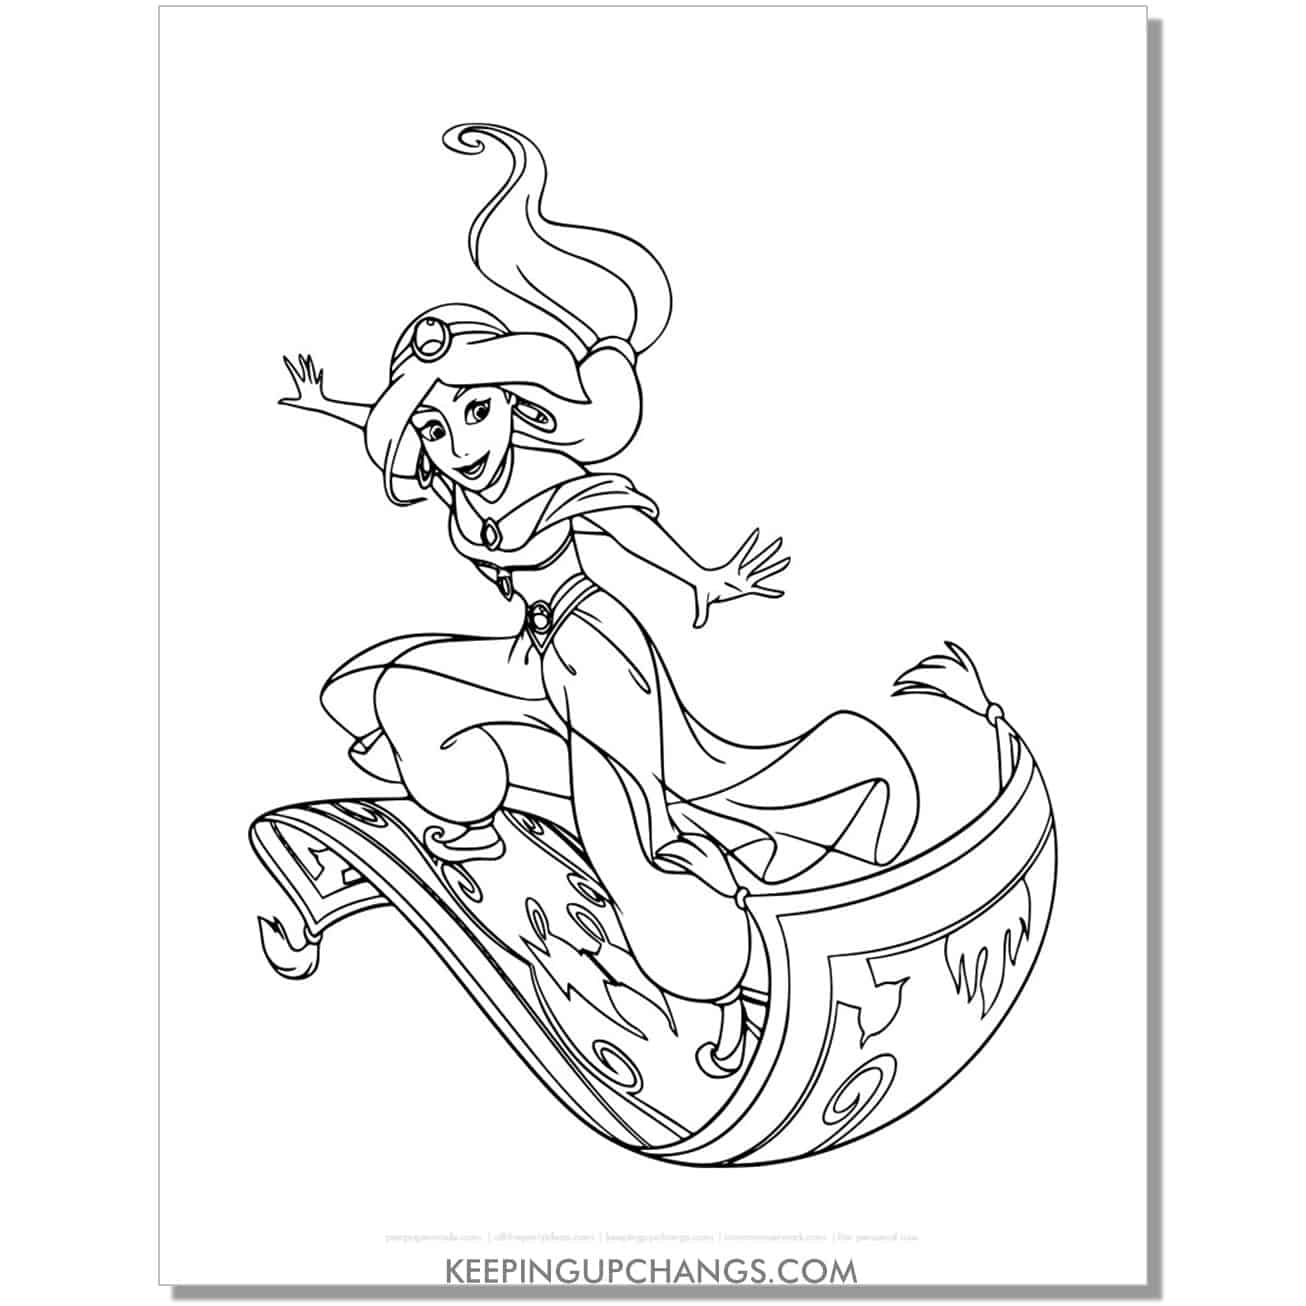 jasmine surfing on flying carpet coloring page, sheet.